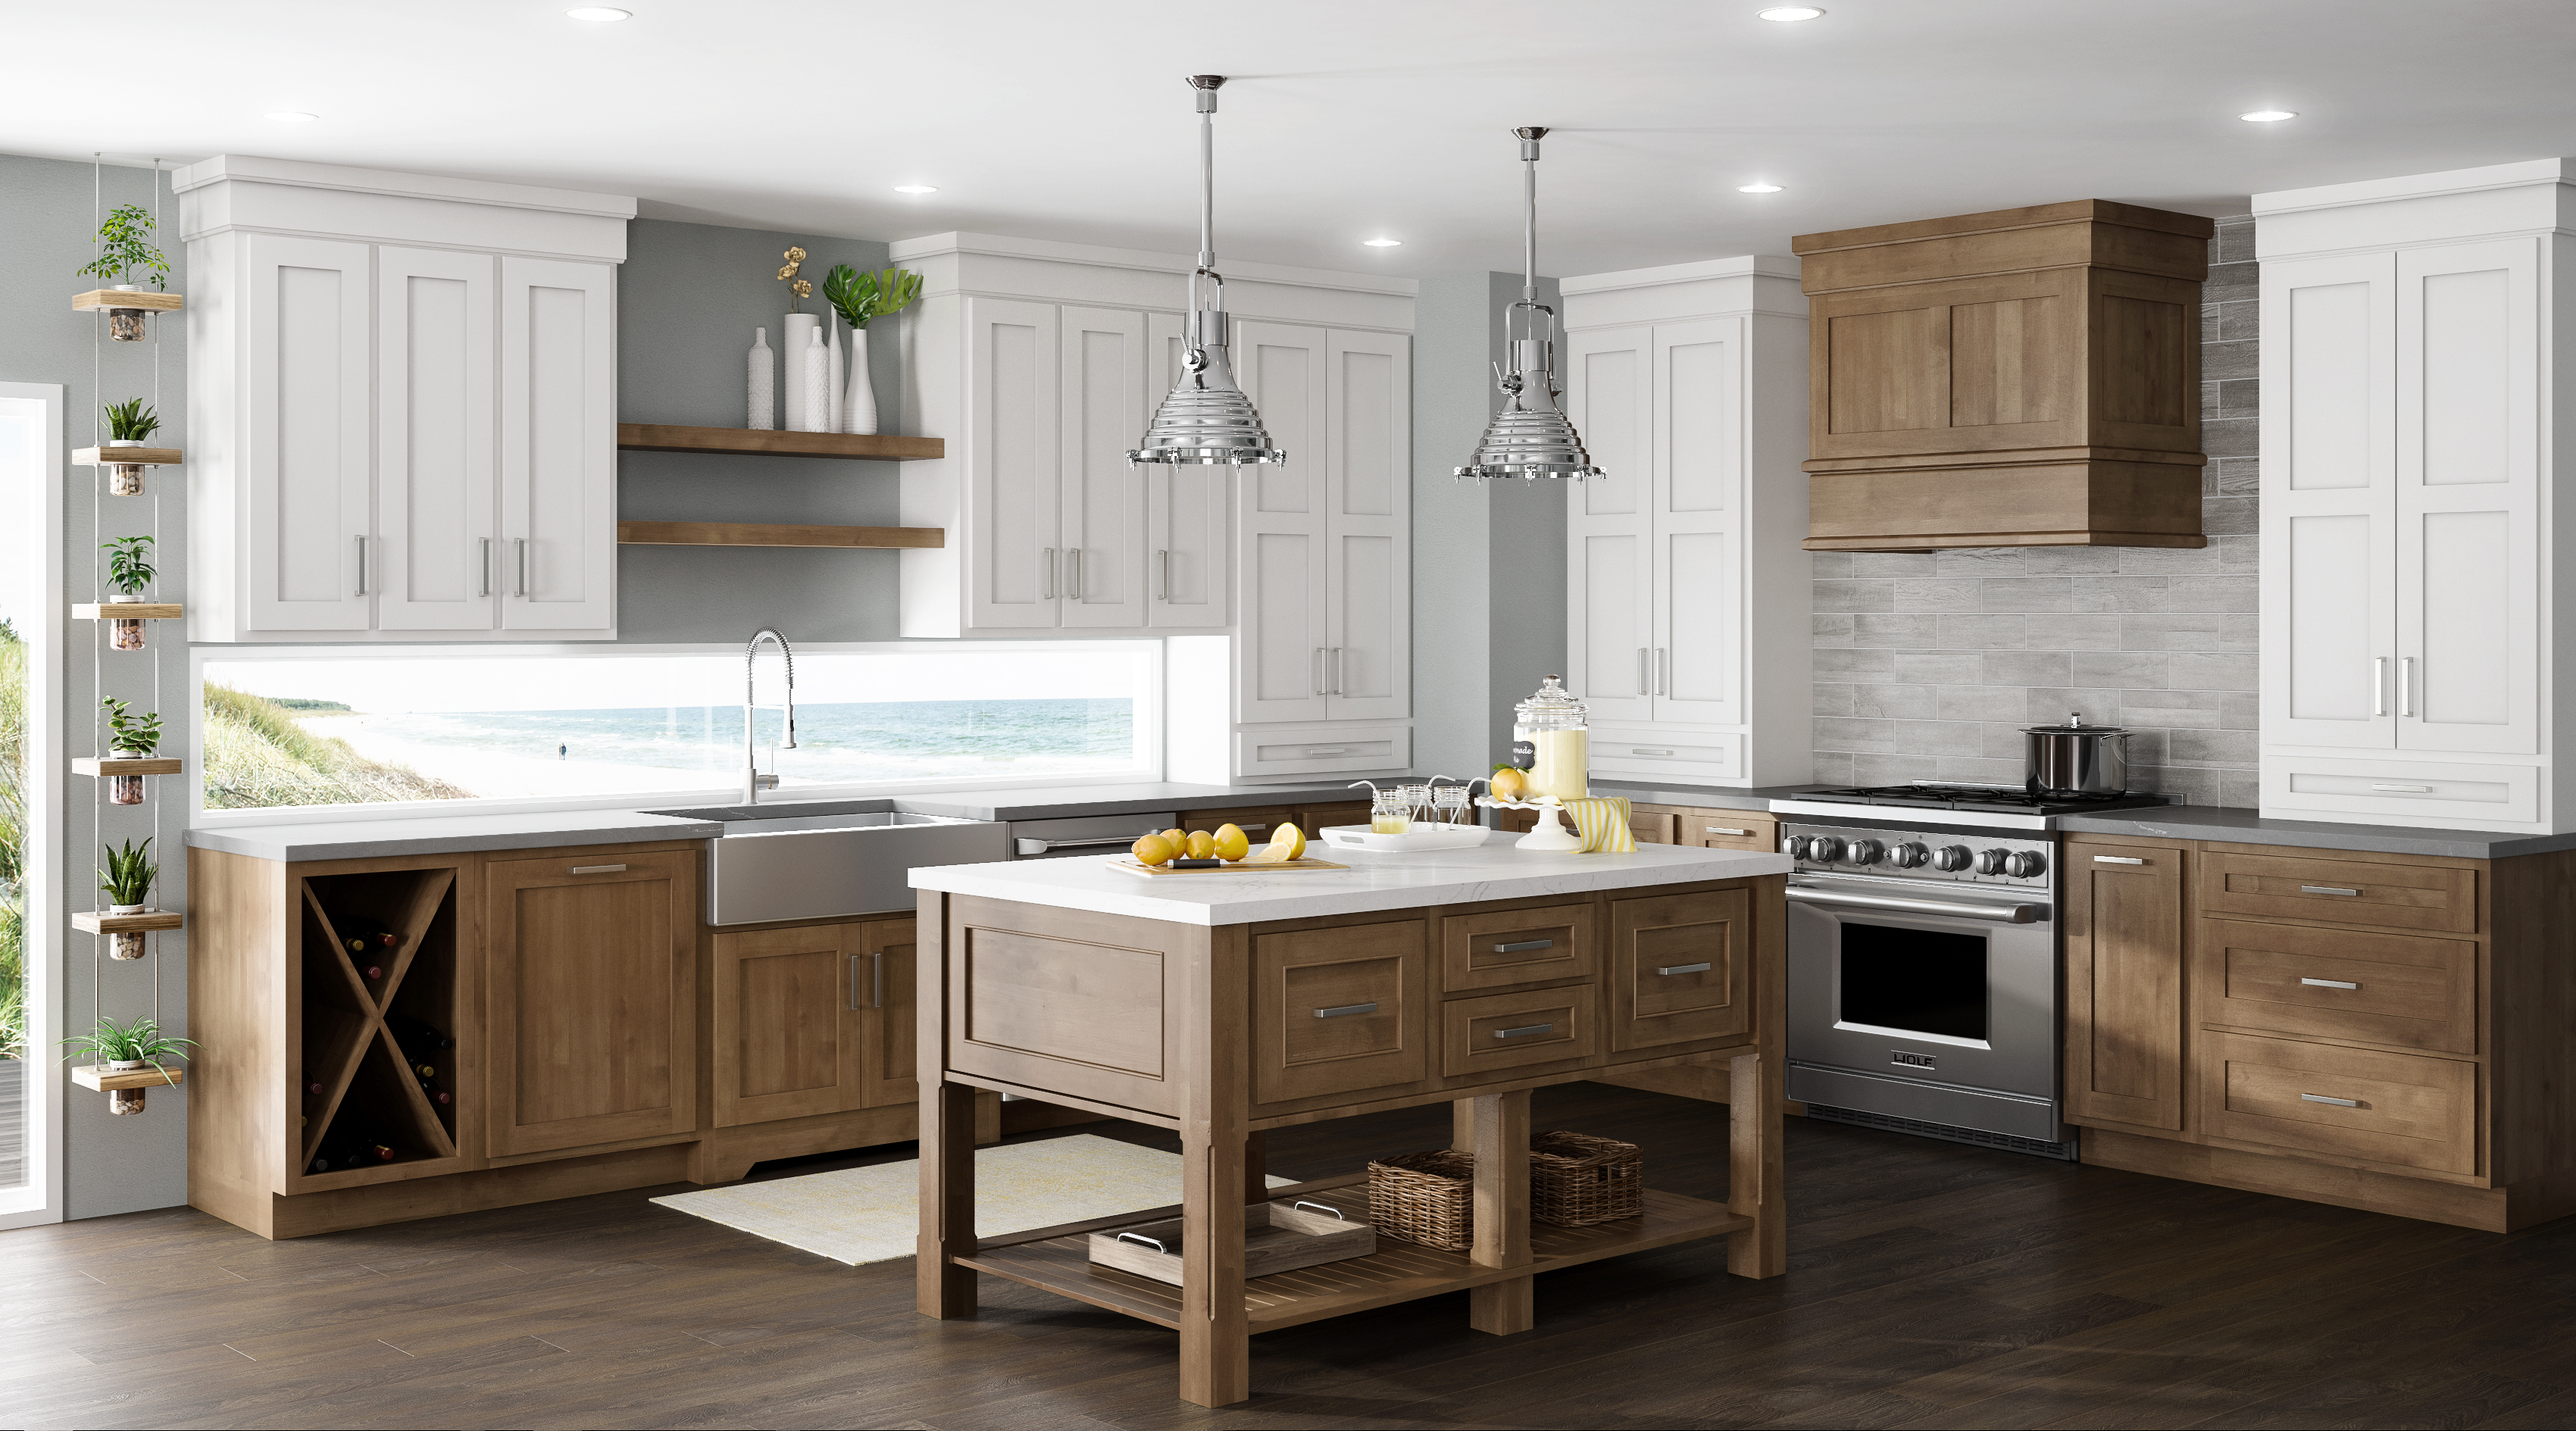 A kitchen layout idea in an L-Shaped kitchen design with a farm table style kitchen island using Standard overlay cabinet doors.